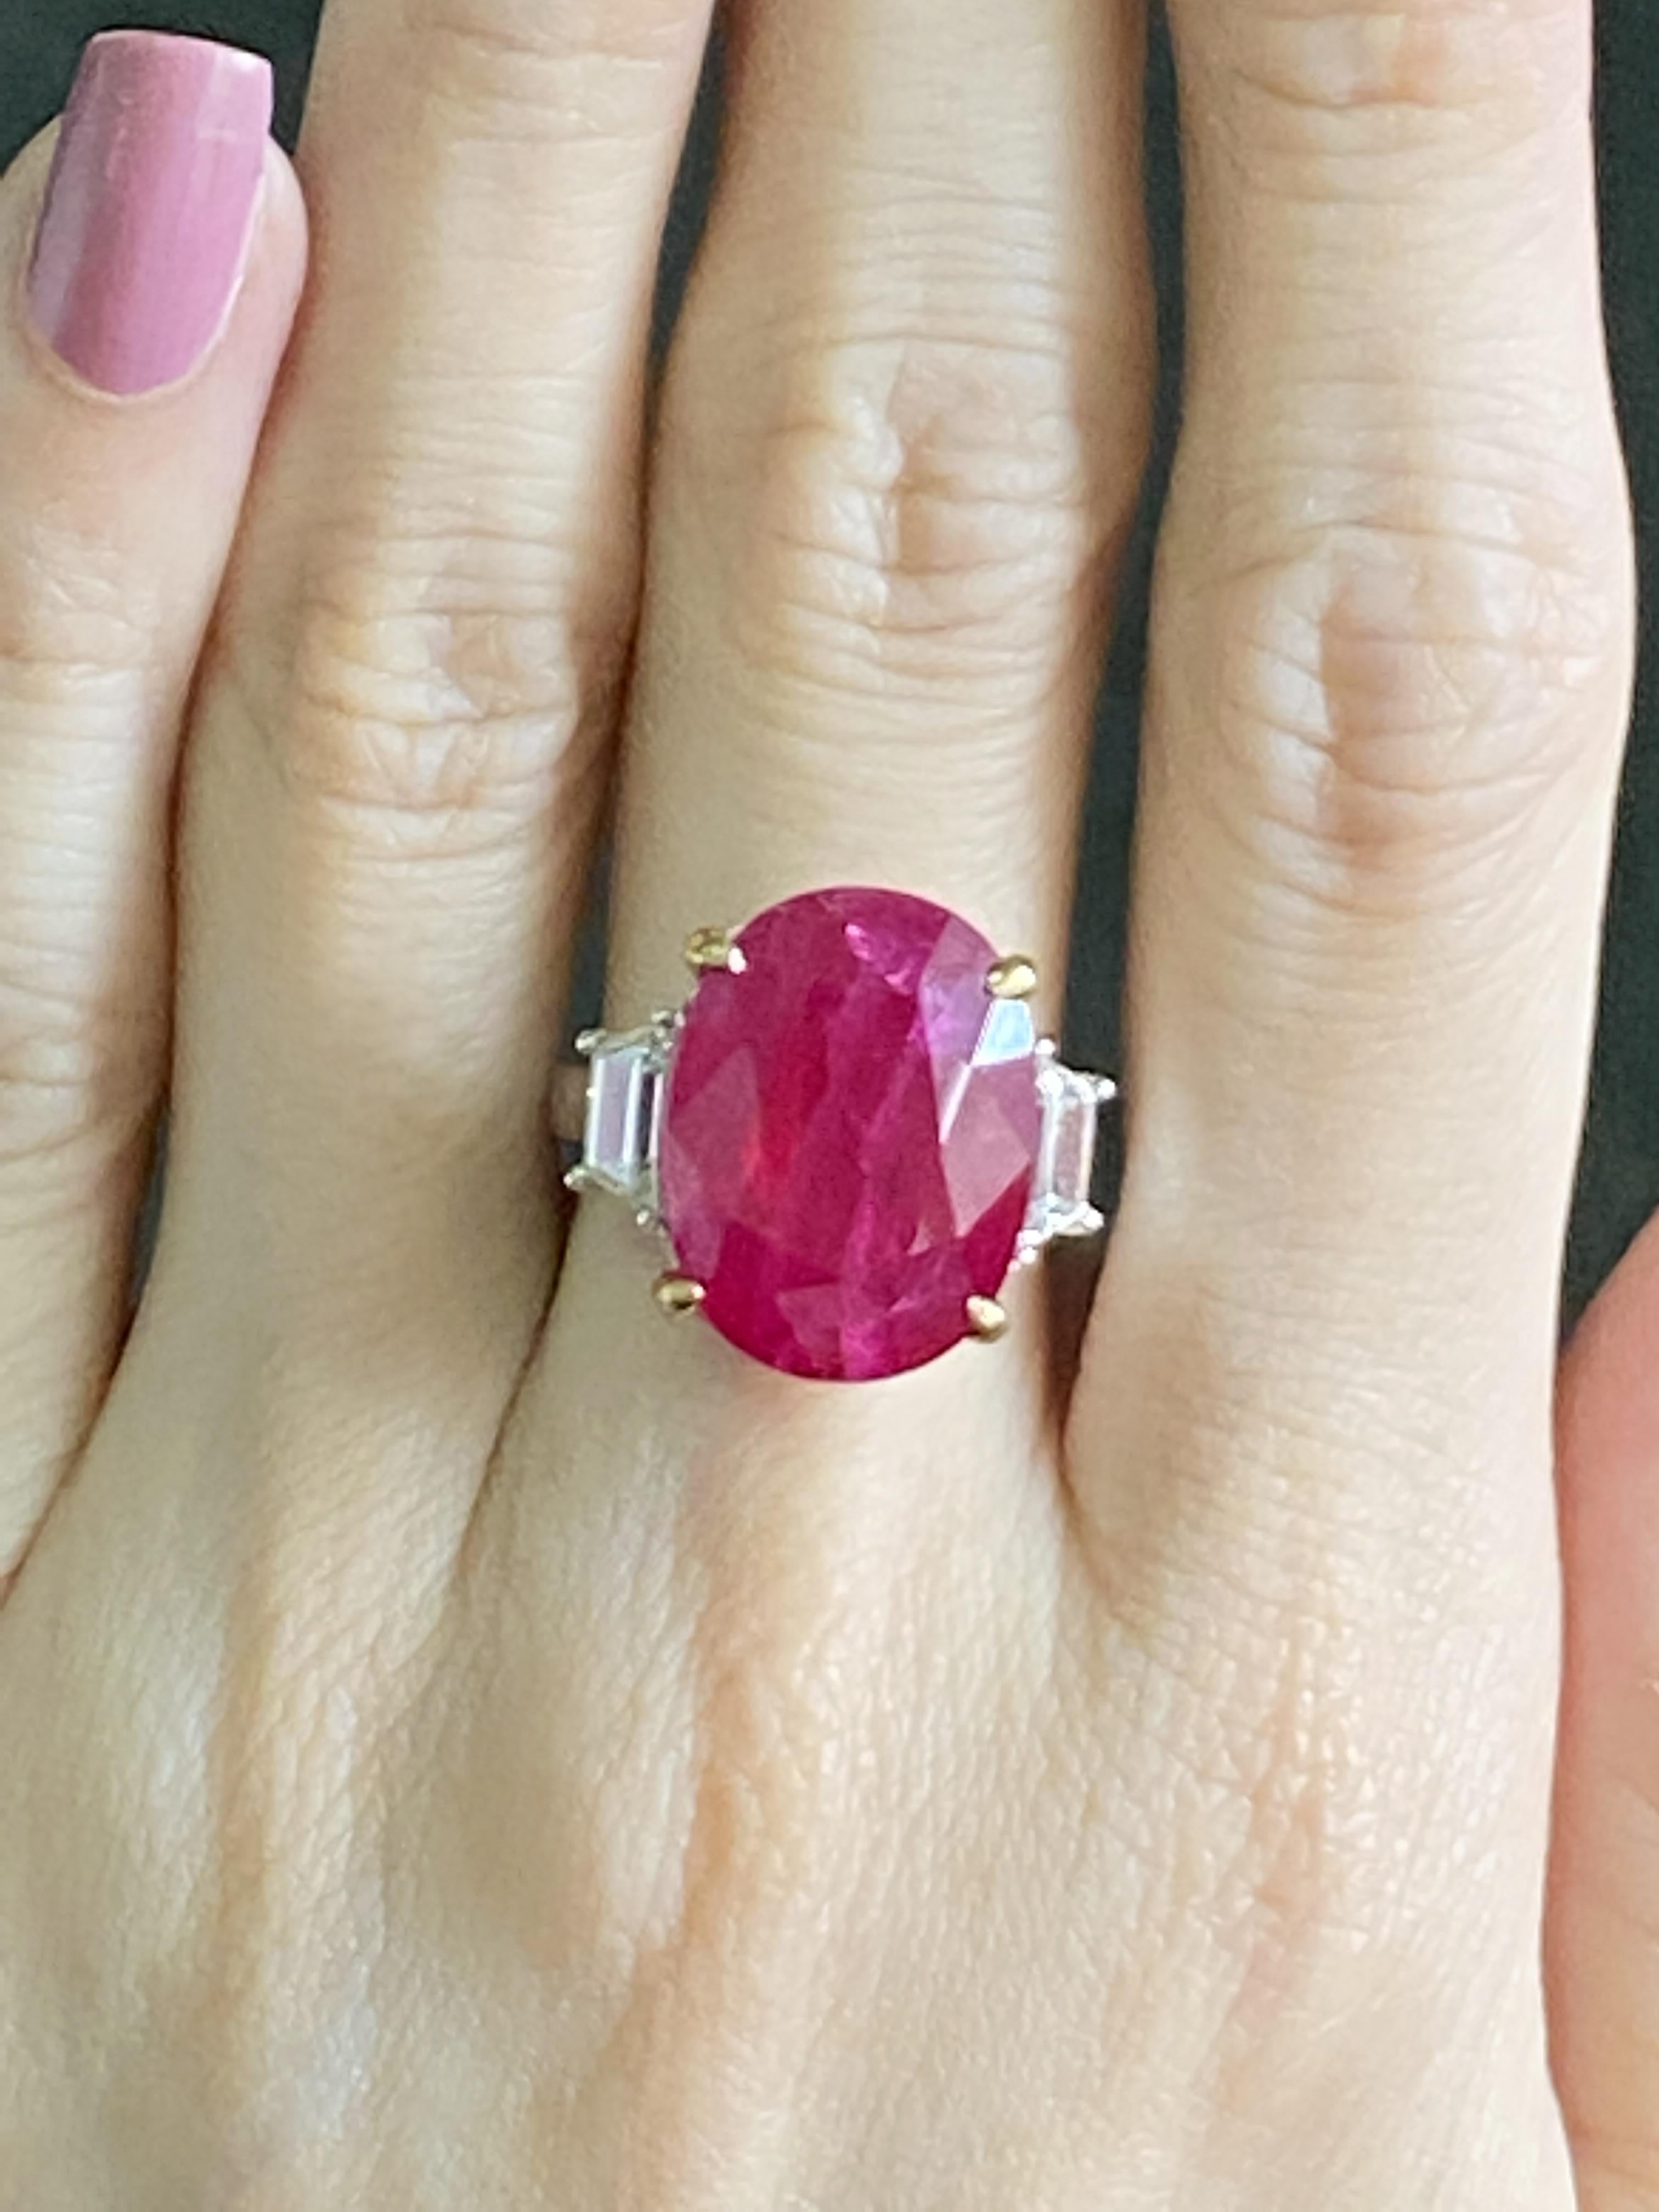 A classic three-stone engagement ring, with a natural 17.04 carat Burmese Ruby, and 1.03 carats VS quality side-stone Diamonds. The Ruby has a beautiful pinkish-red hue, and is set in a solid 18K White Gold casing with Yellow Gold prongs. The ring